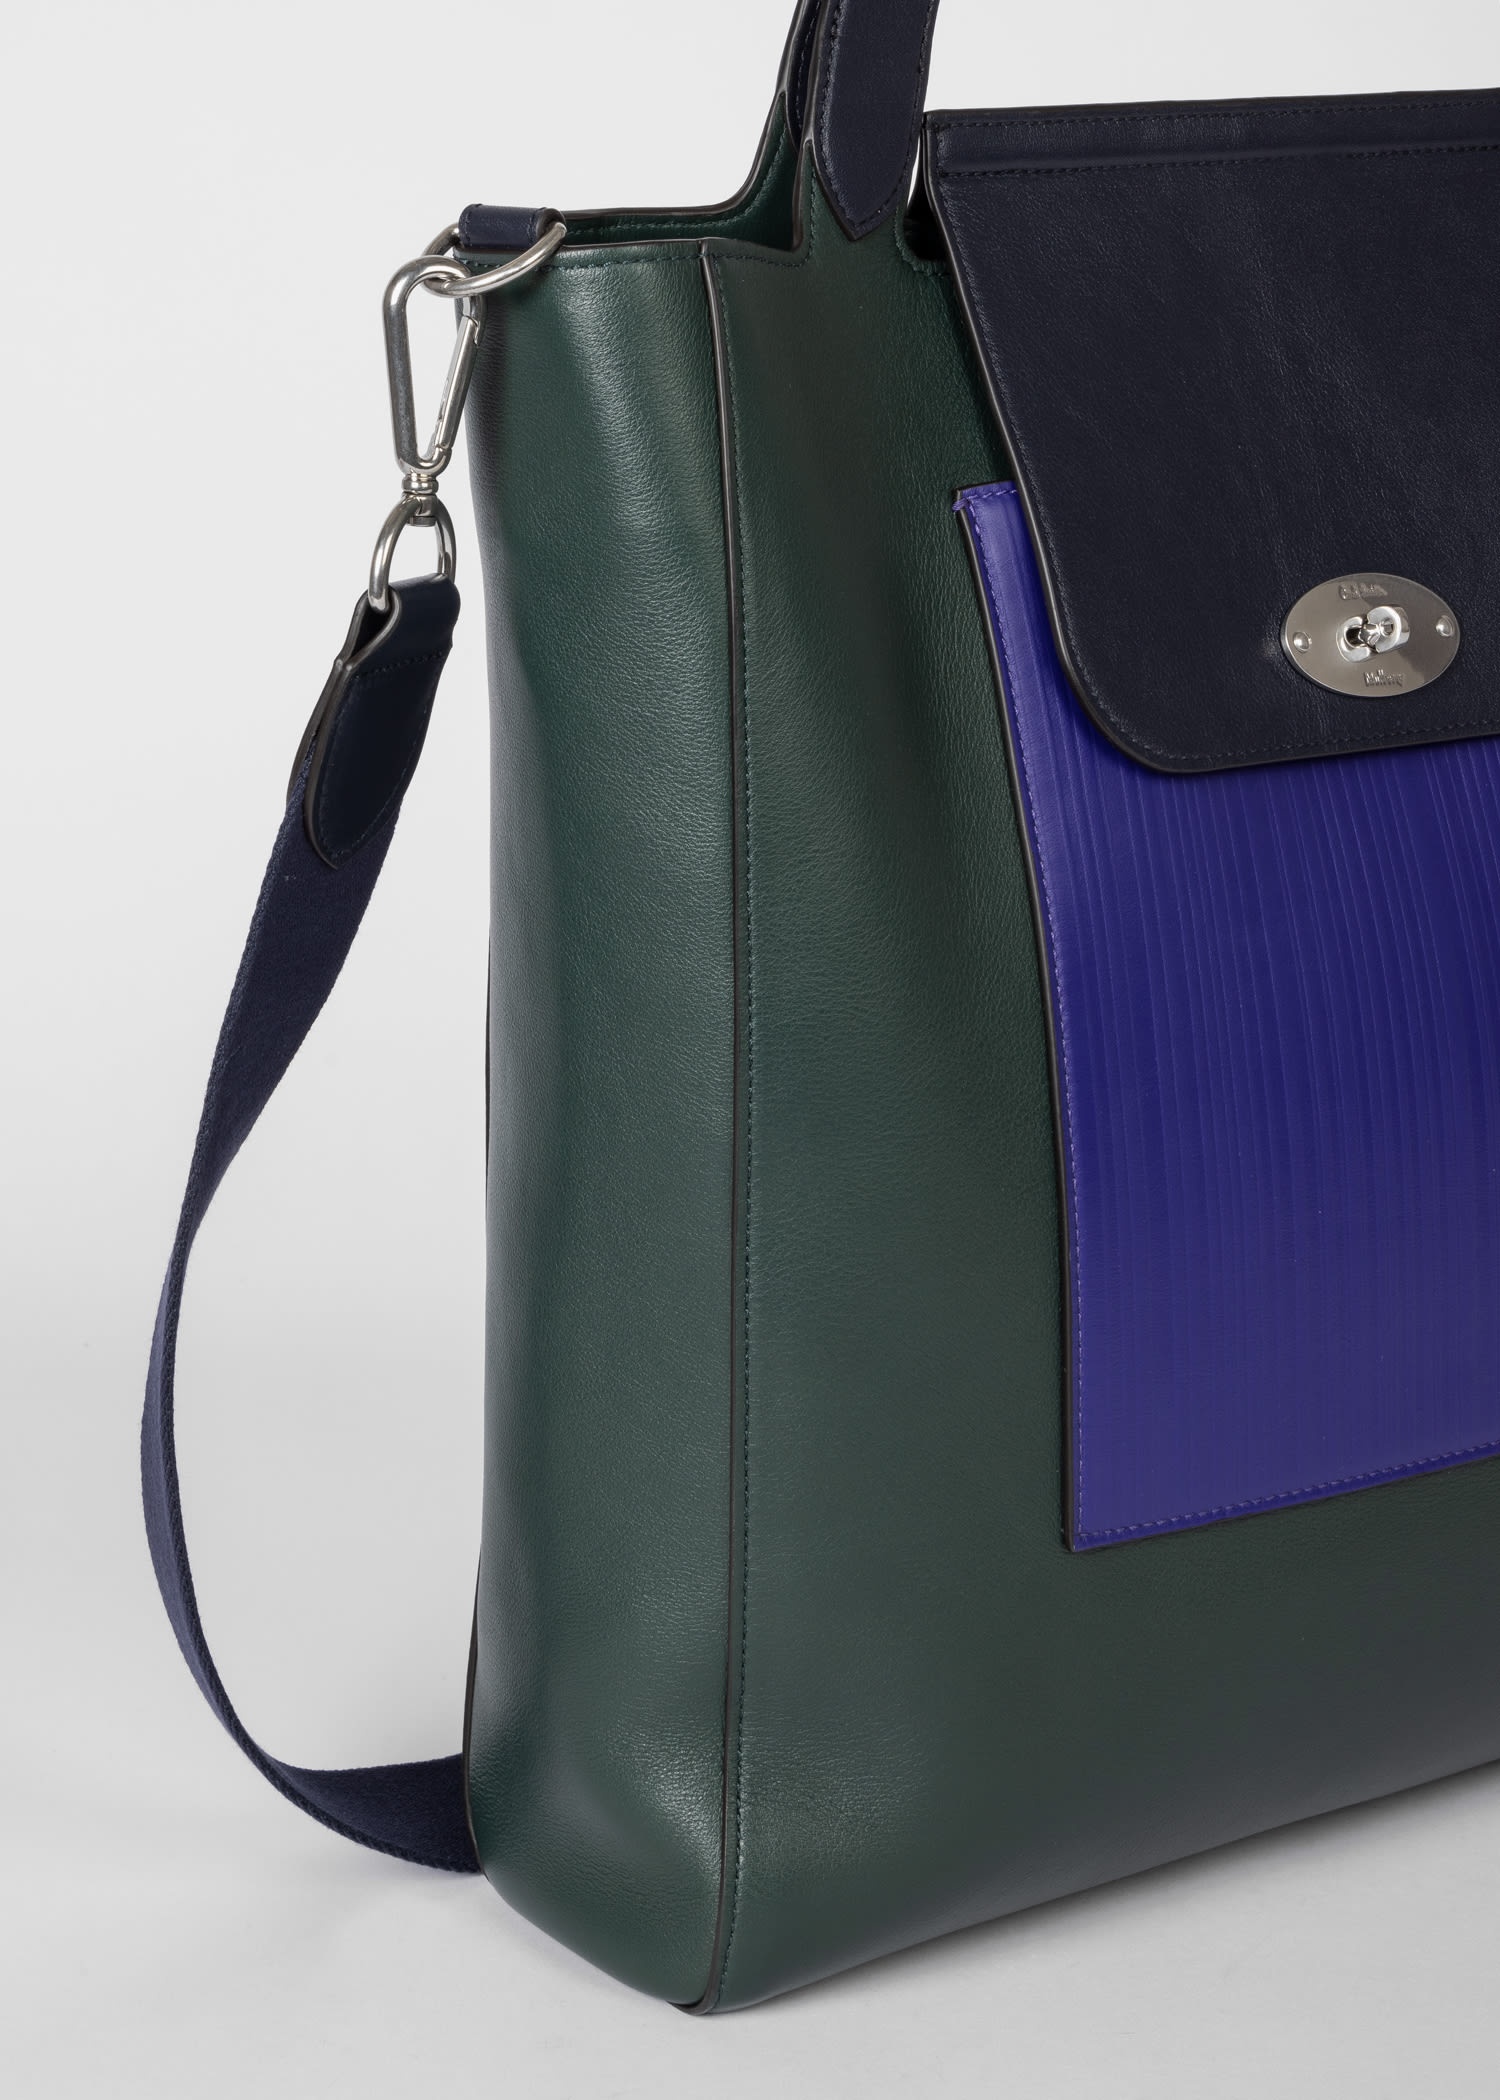 Mulberry x Paul Smith - Mulberry Green Antony Tote Bag - 8